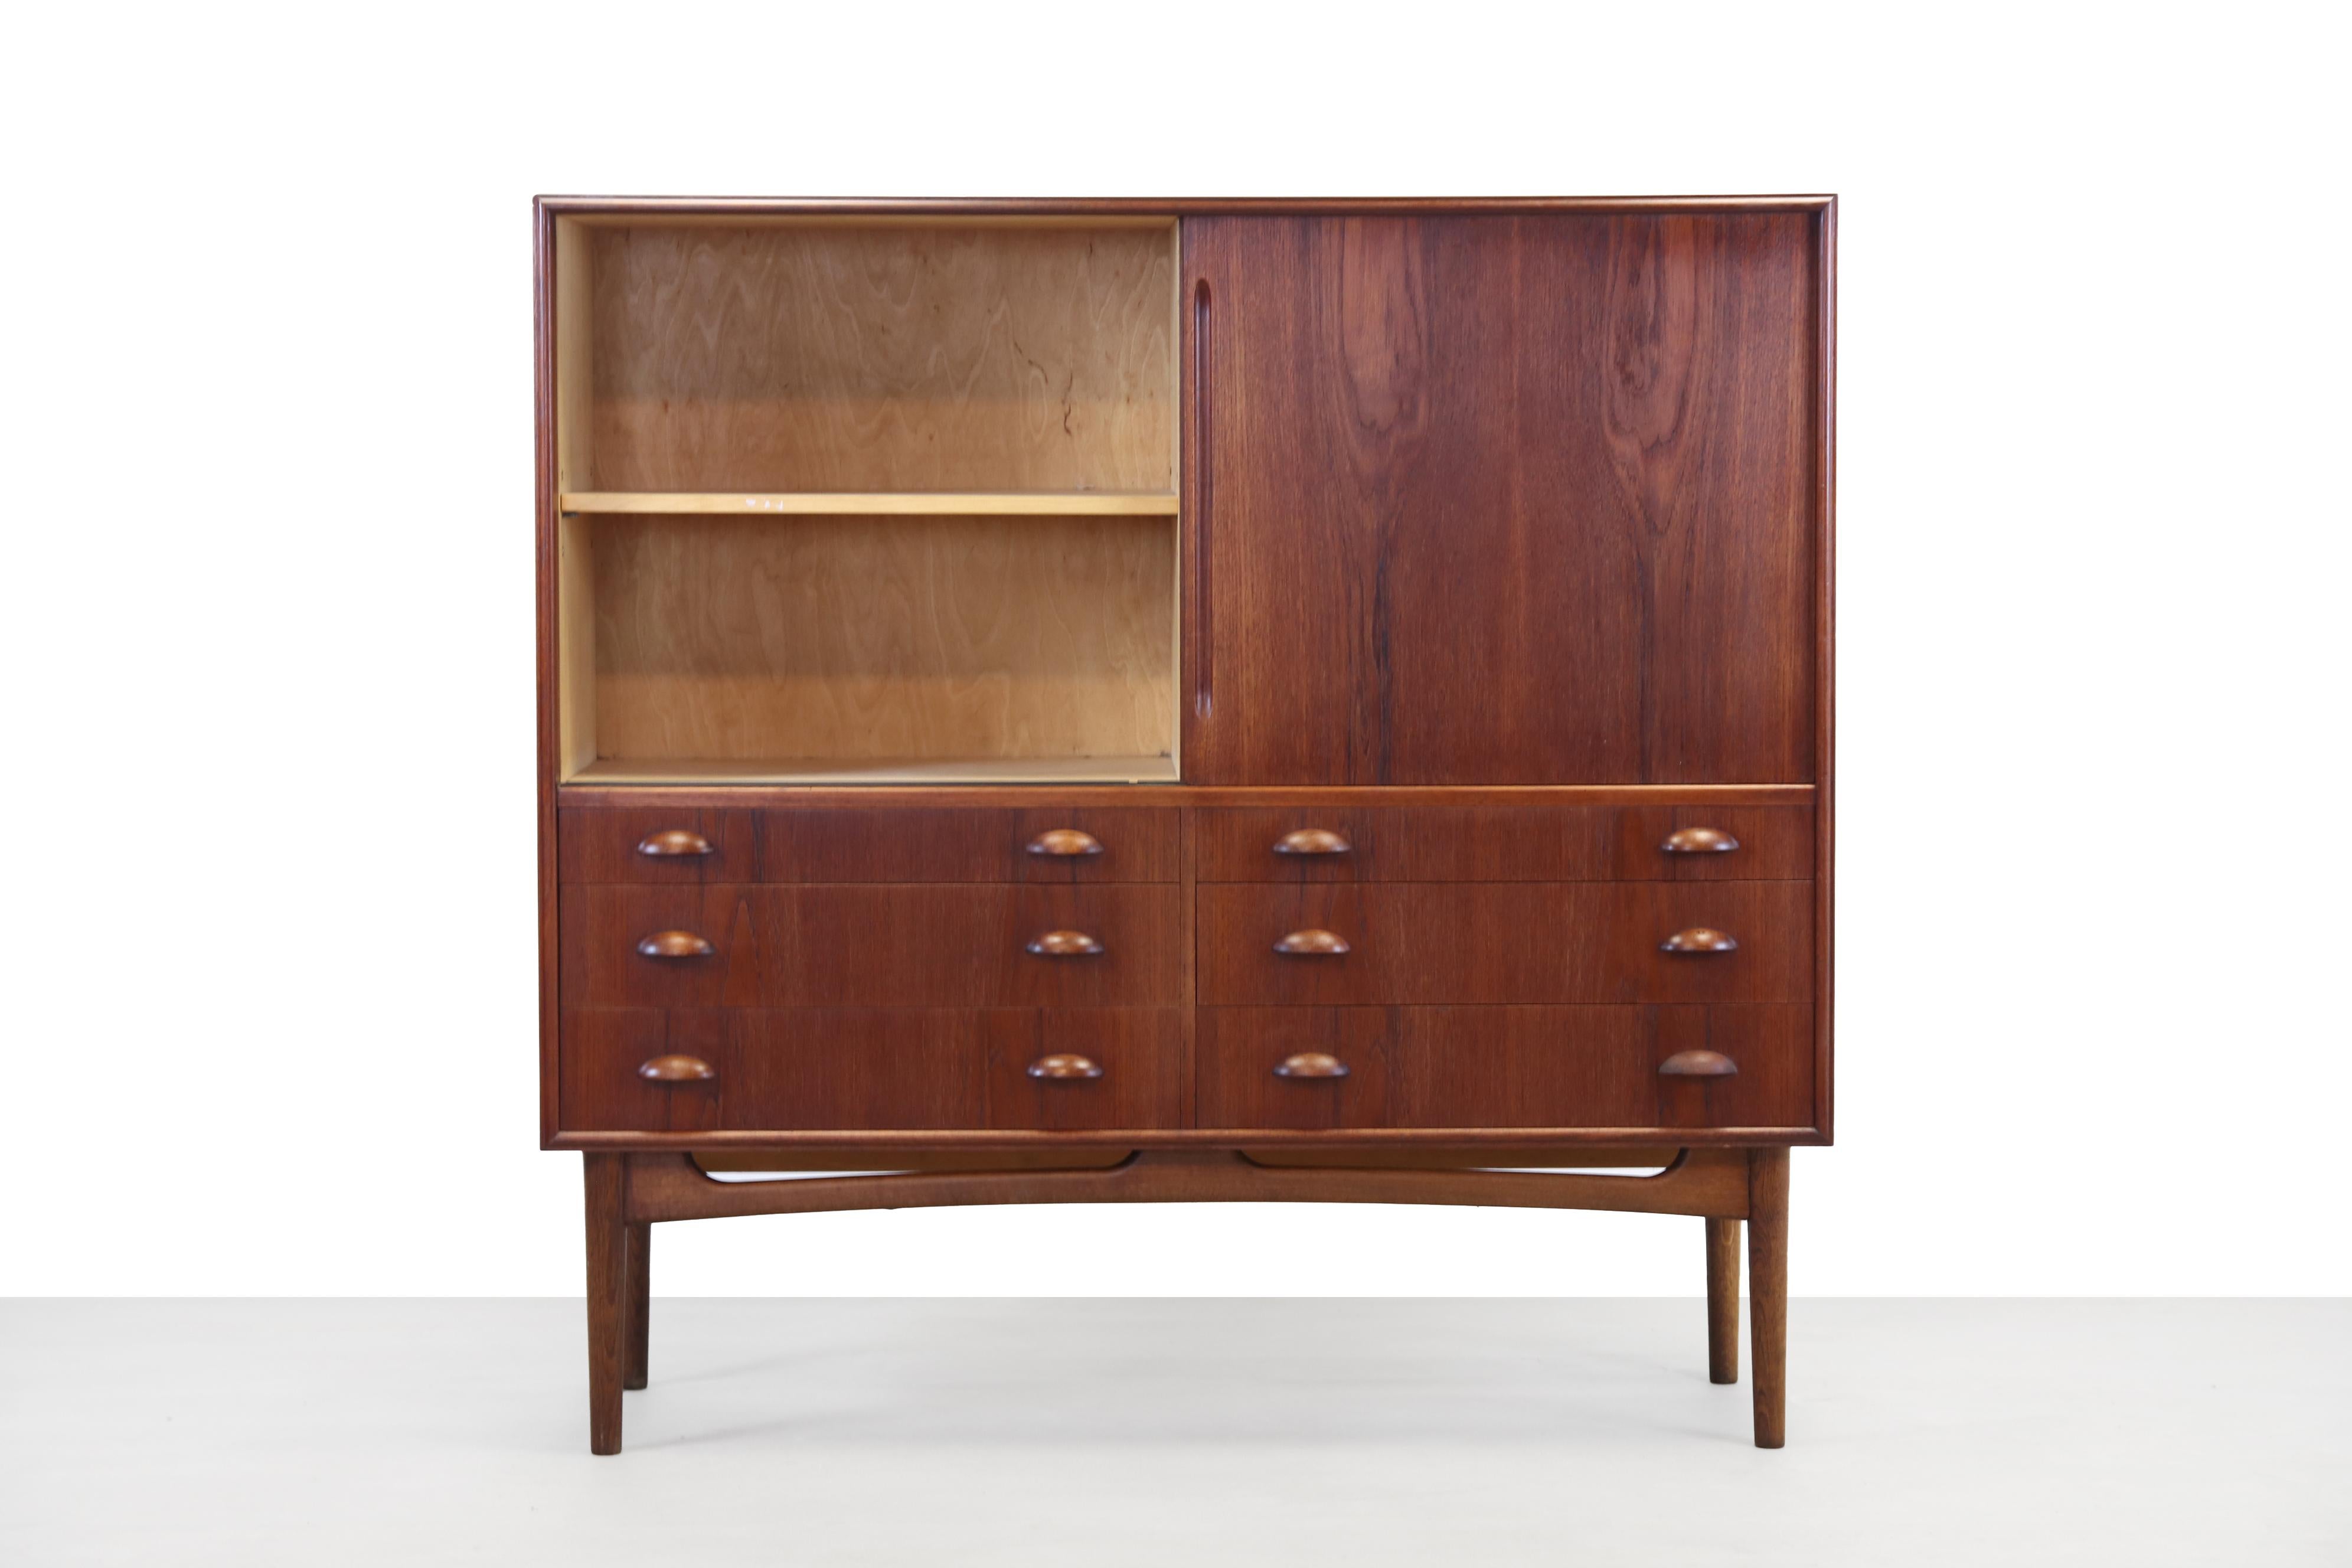 Very fine sized teak Danish design highboard. This cabinet has a teak exterior, a birch interior and an oak wooden base. Over time, the oak has been colored almost the same as the teak of the cabinet. The cabinet has two sliding doors and six